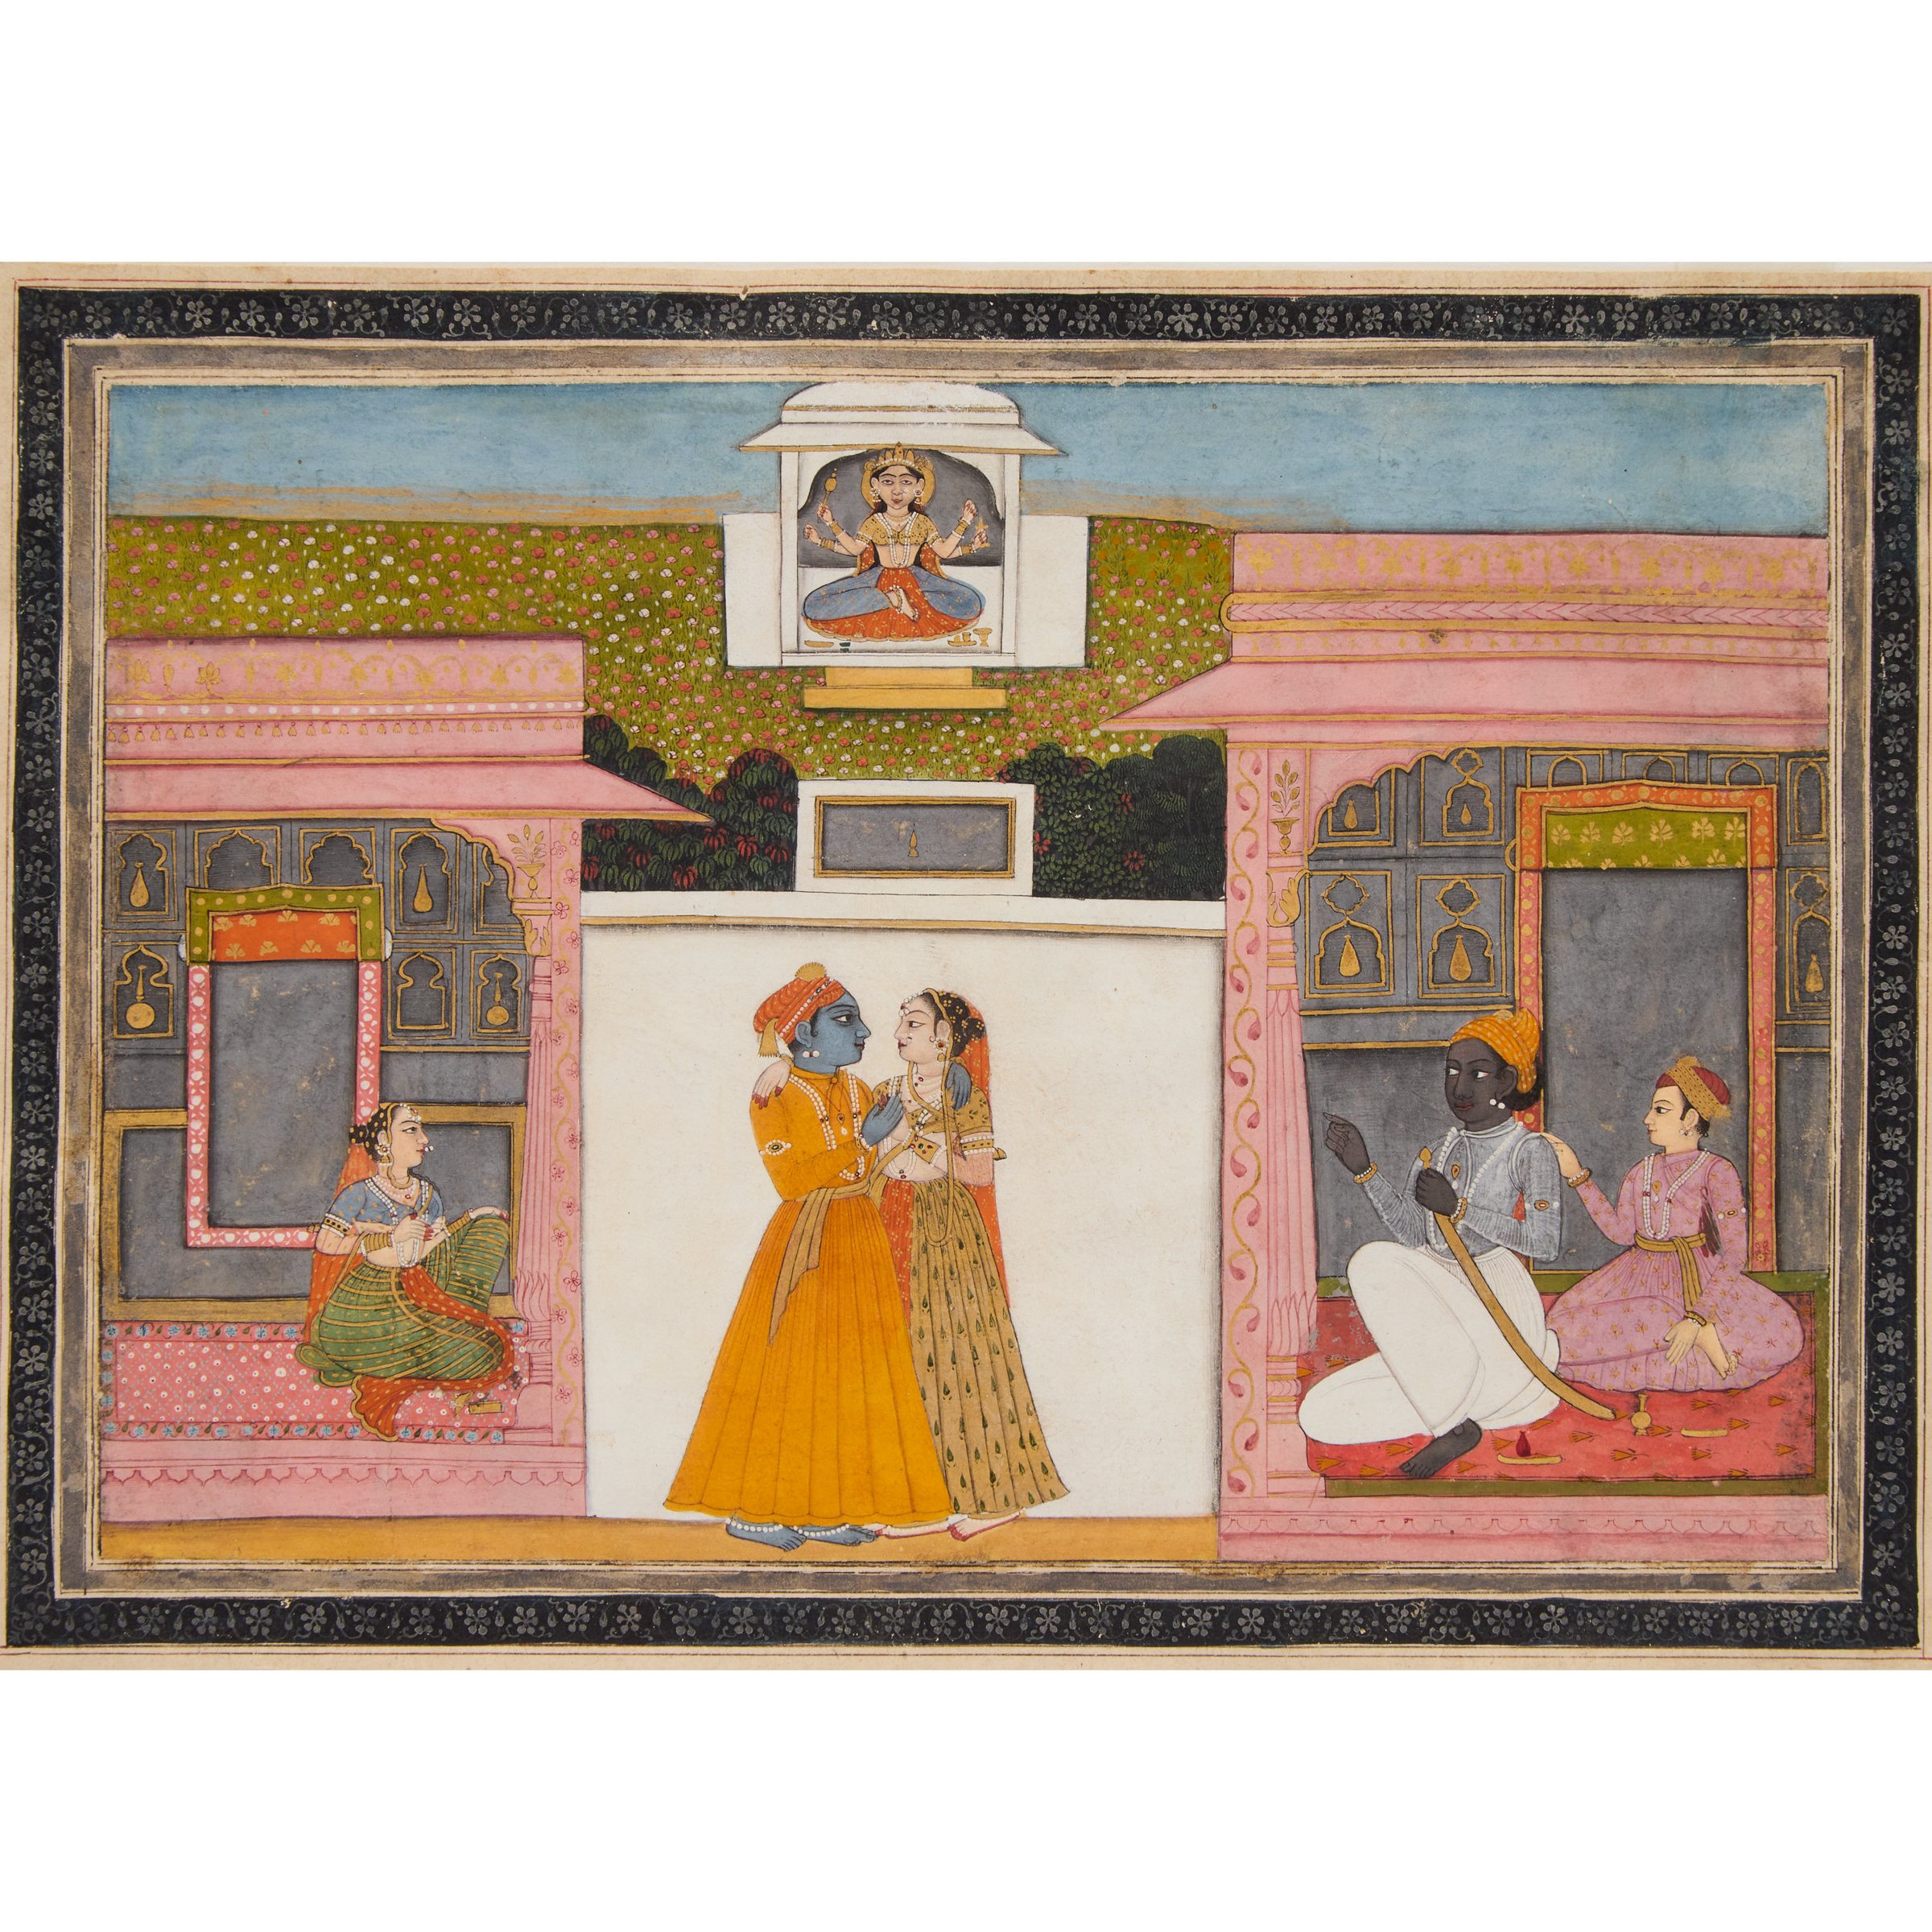 A Painting of Krishna and Radha  2fb0593